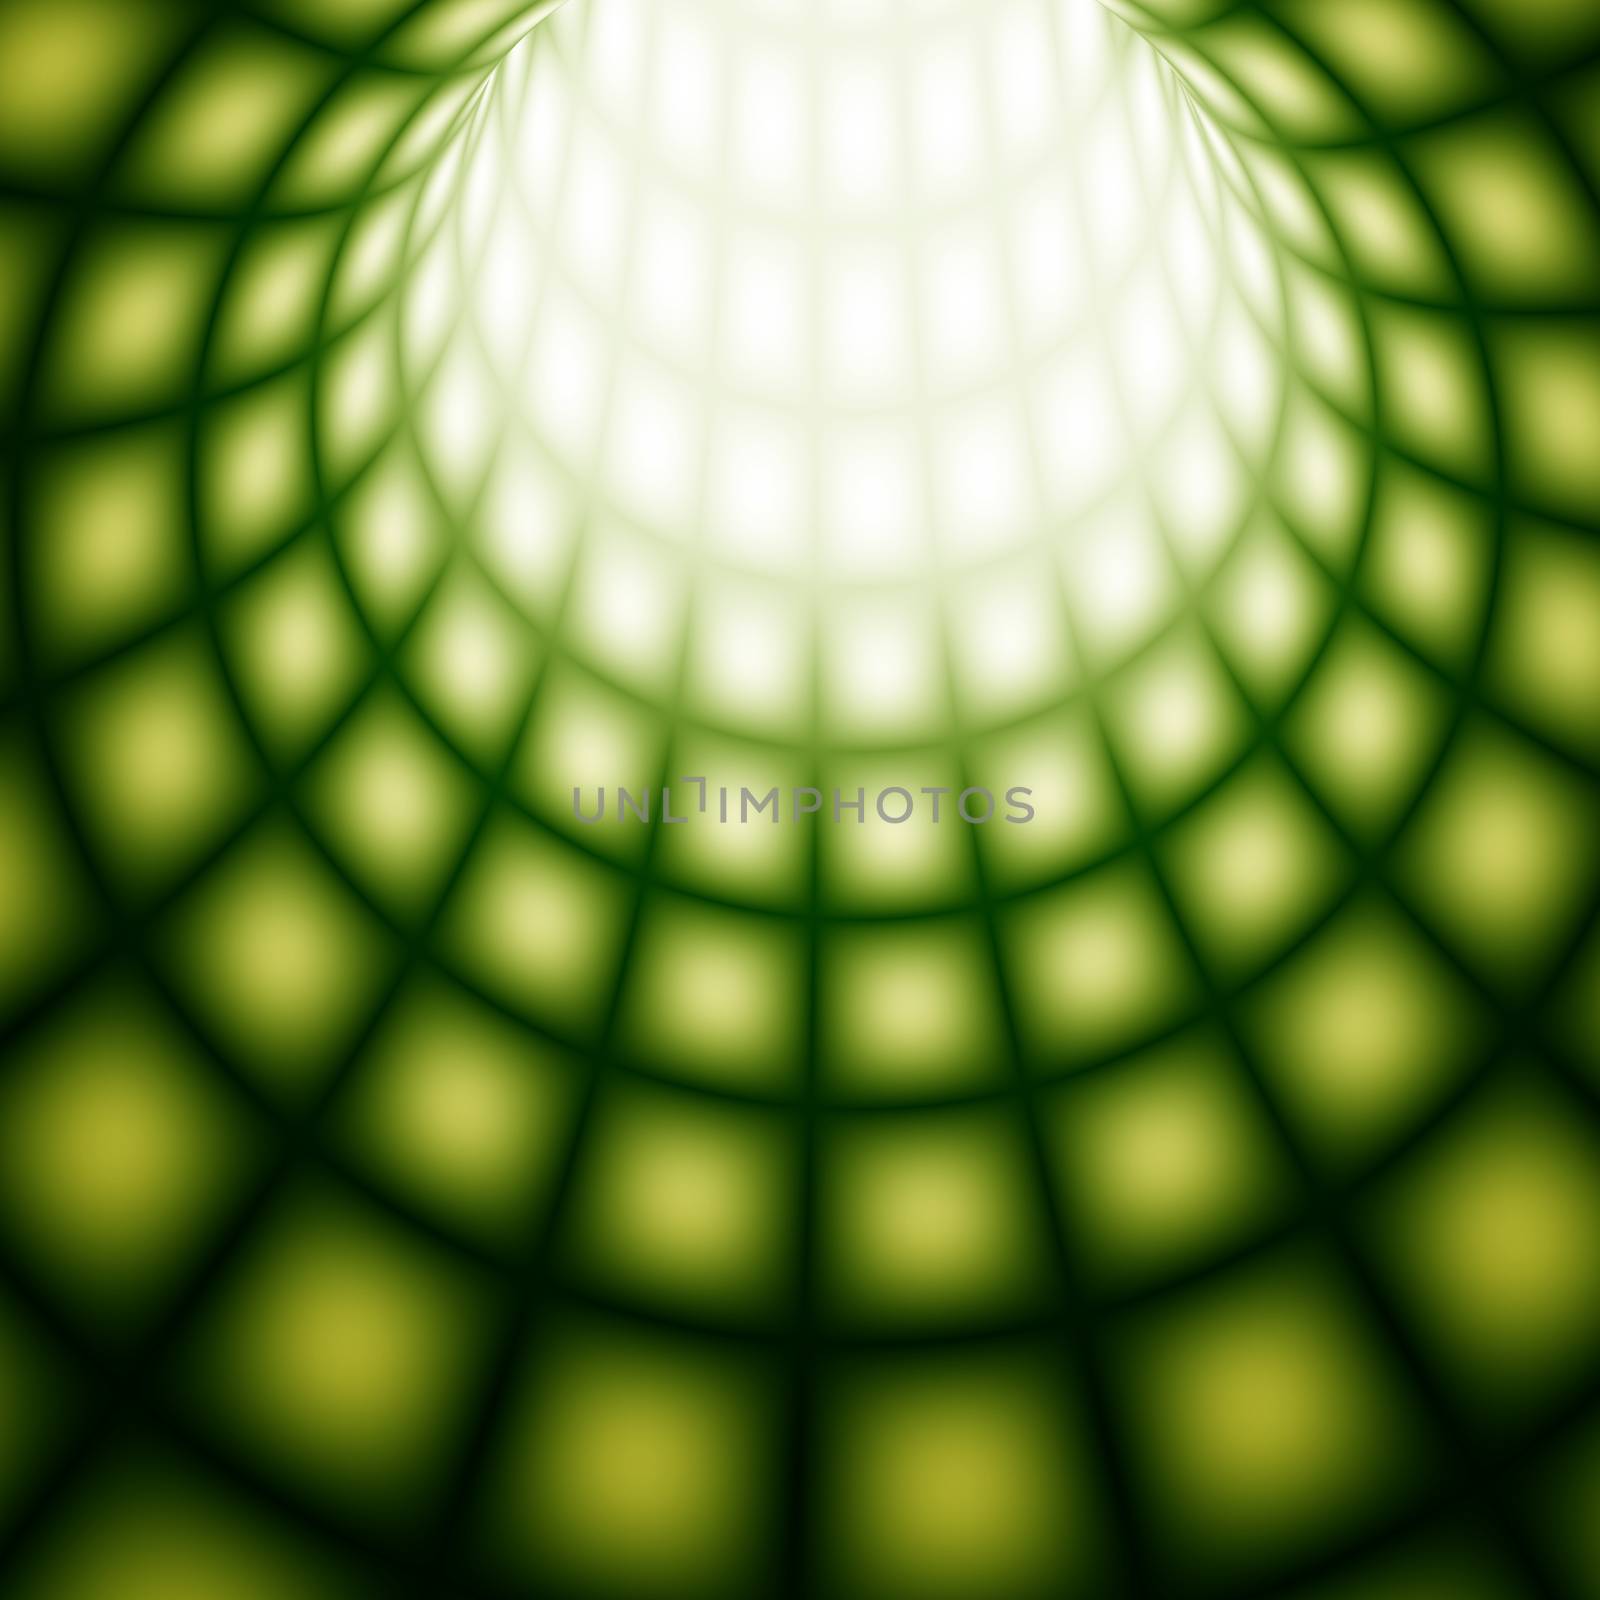 Abstract Tunnel line technology background. Image converted using ifftoany